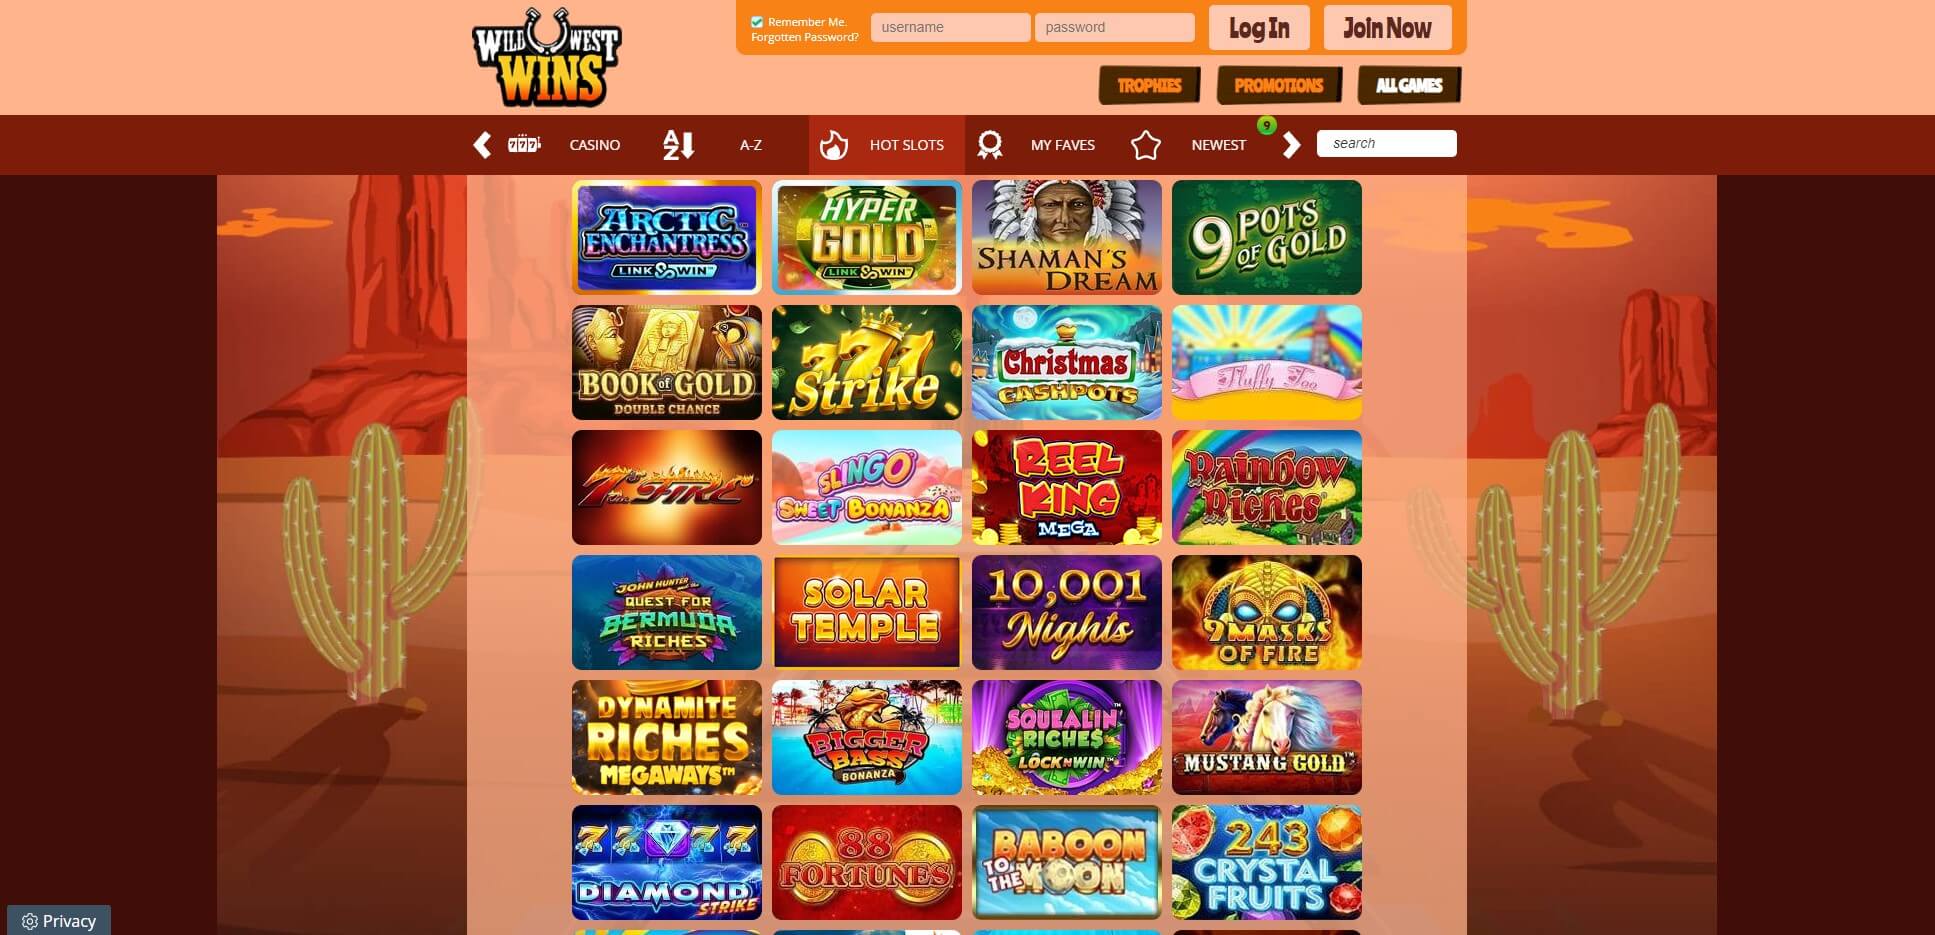 Games at WildWestWins Casino